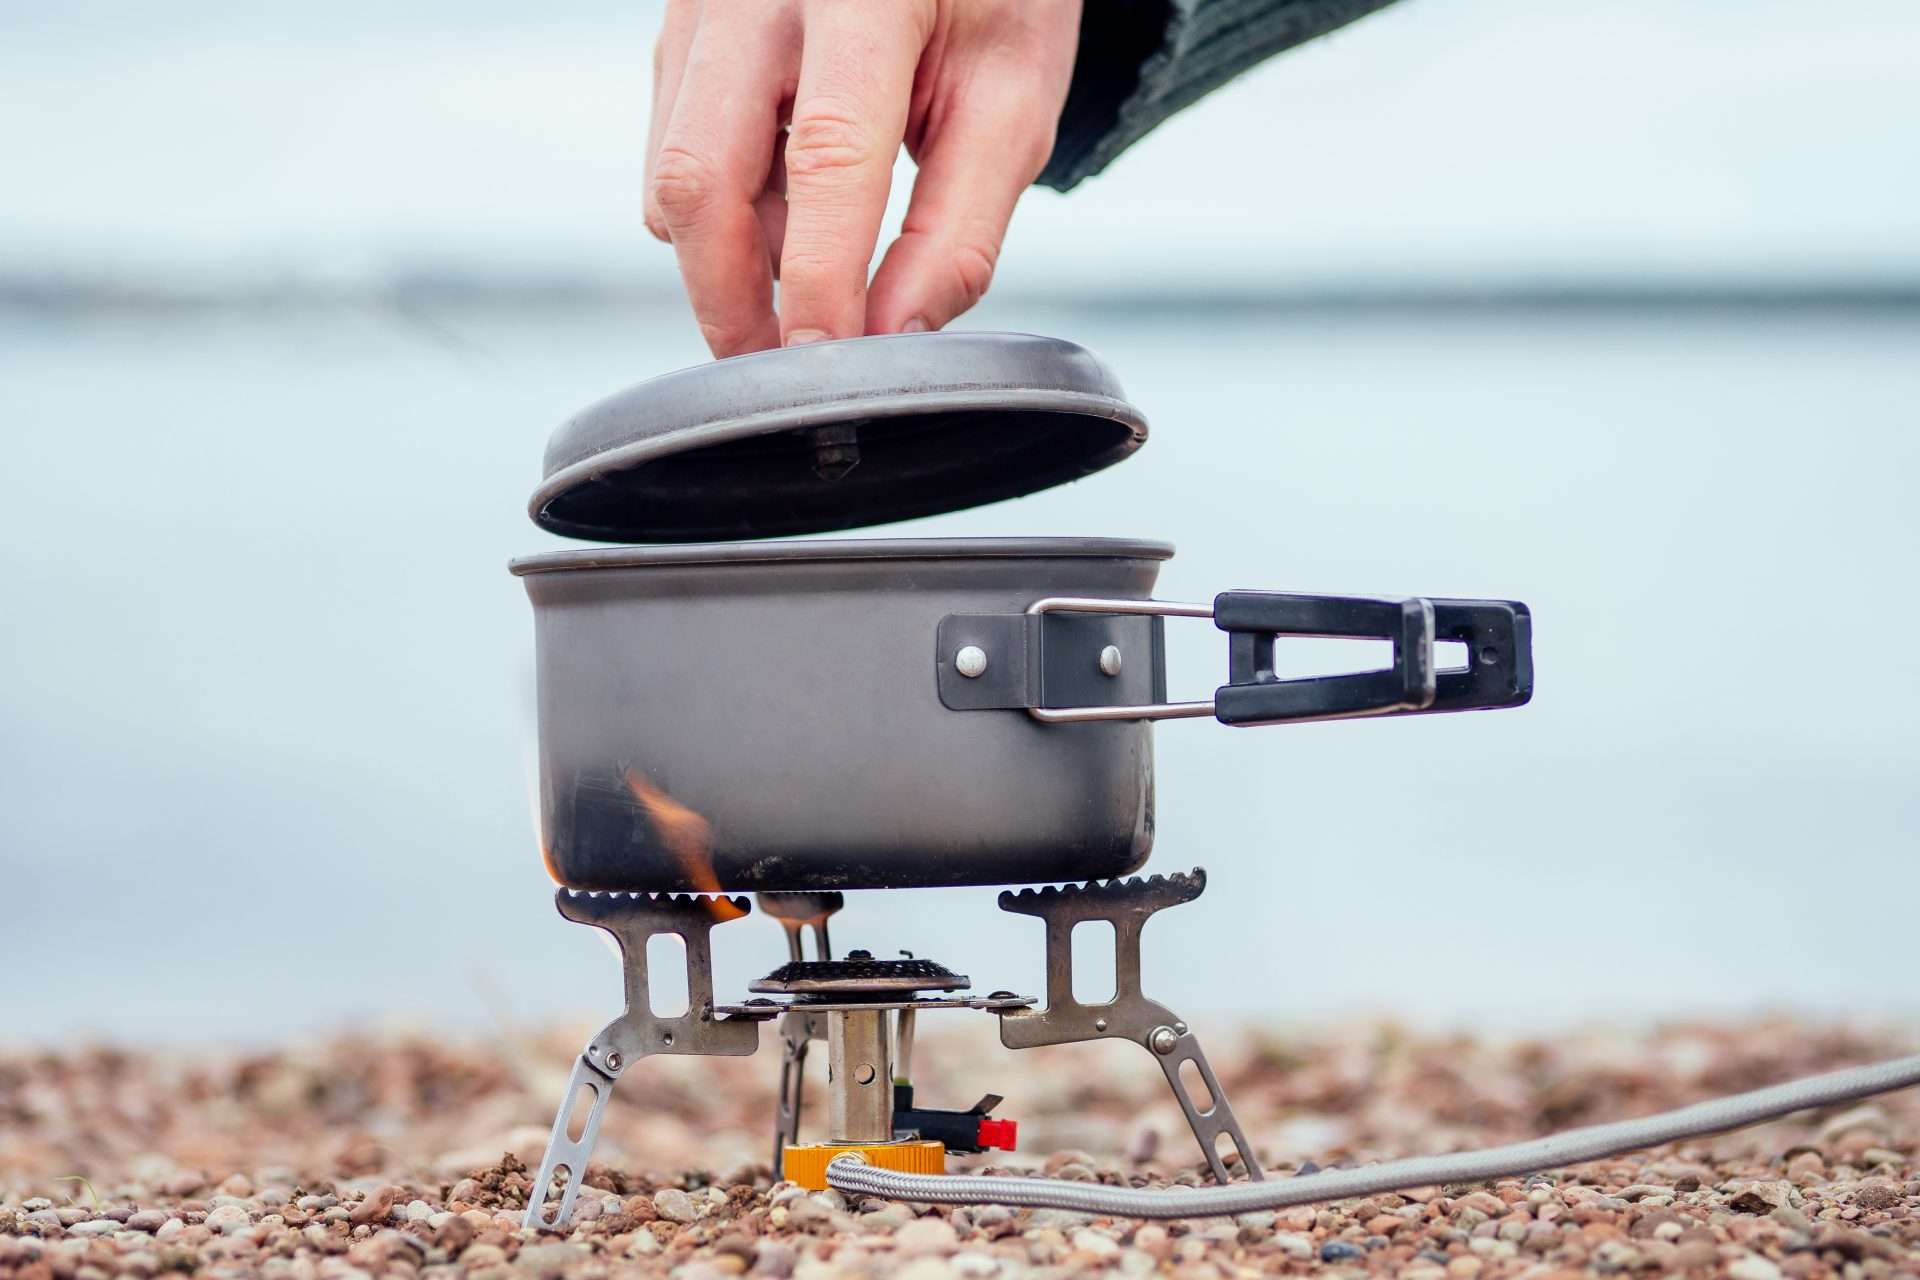 Camping stove being used on the beach.